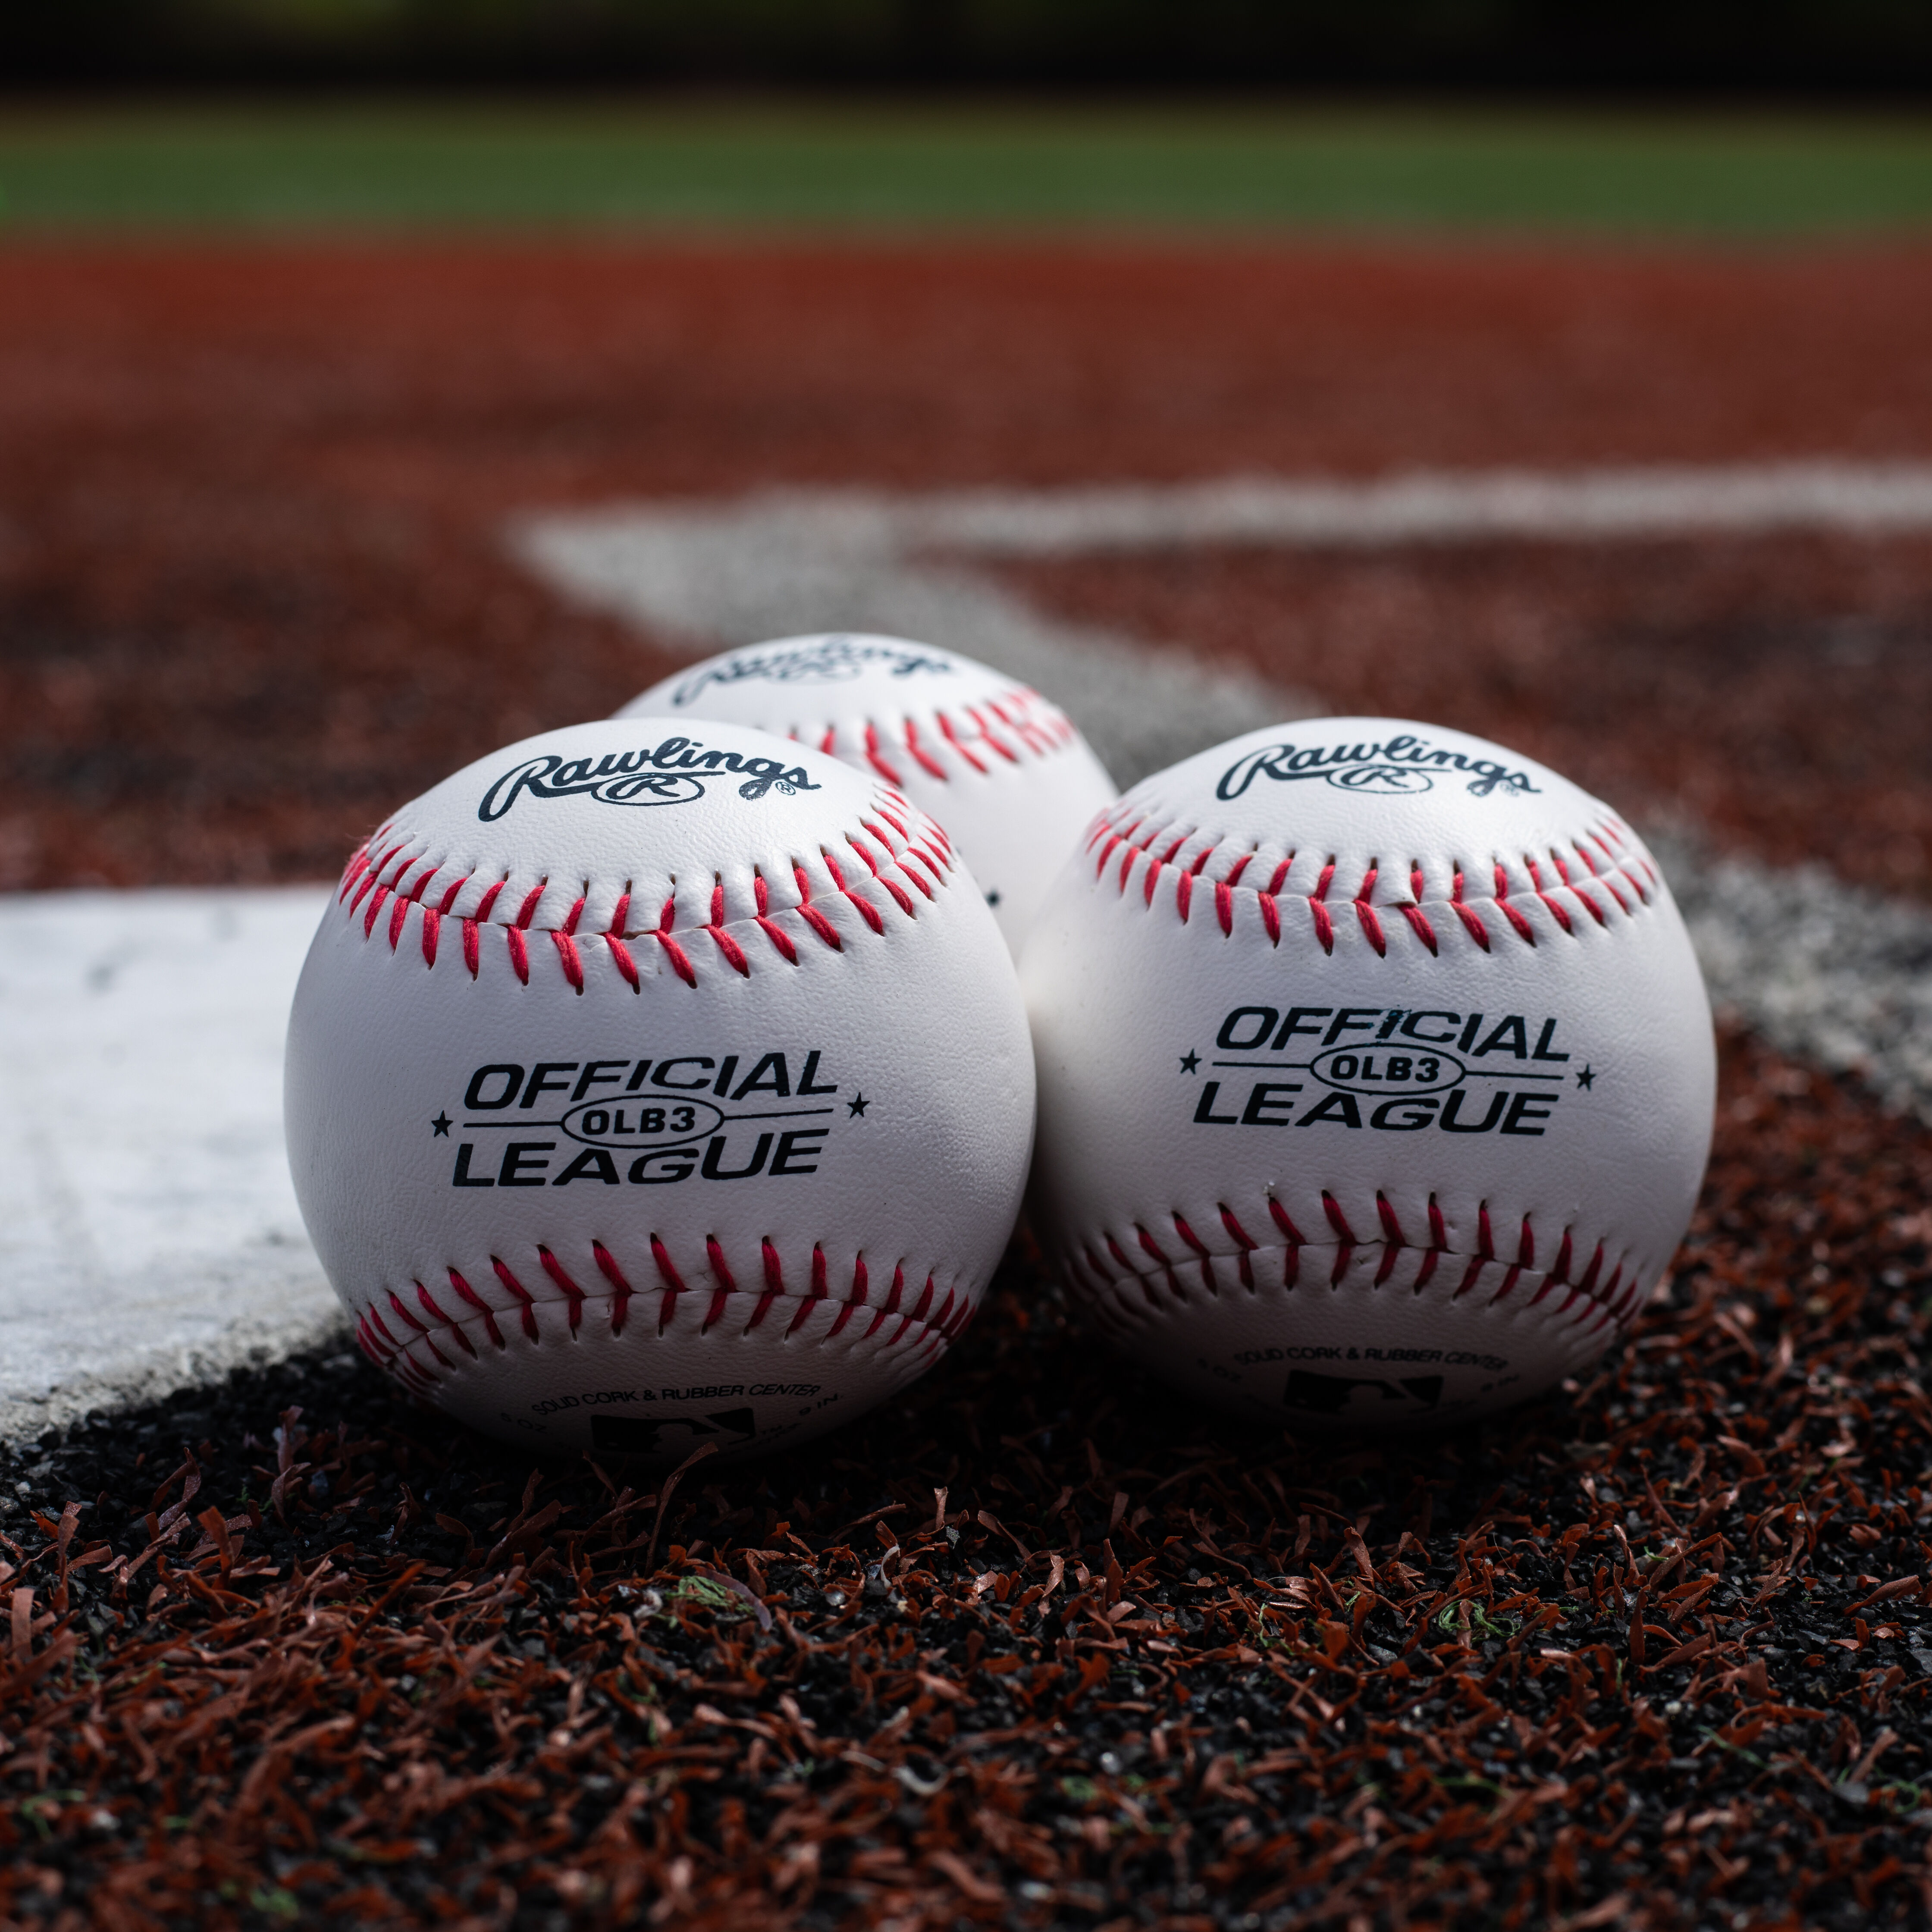 Details about   Baseballs New Bag of 12 Rawlings Official League OLB3 Recreational Practice Use 